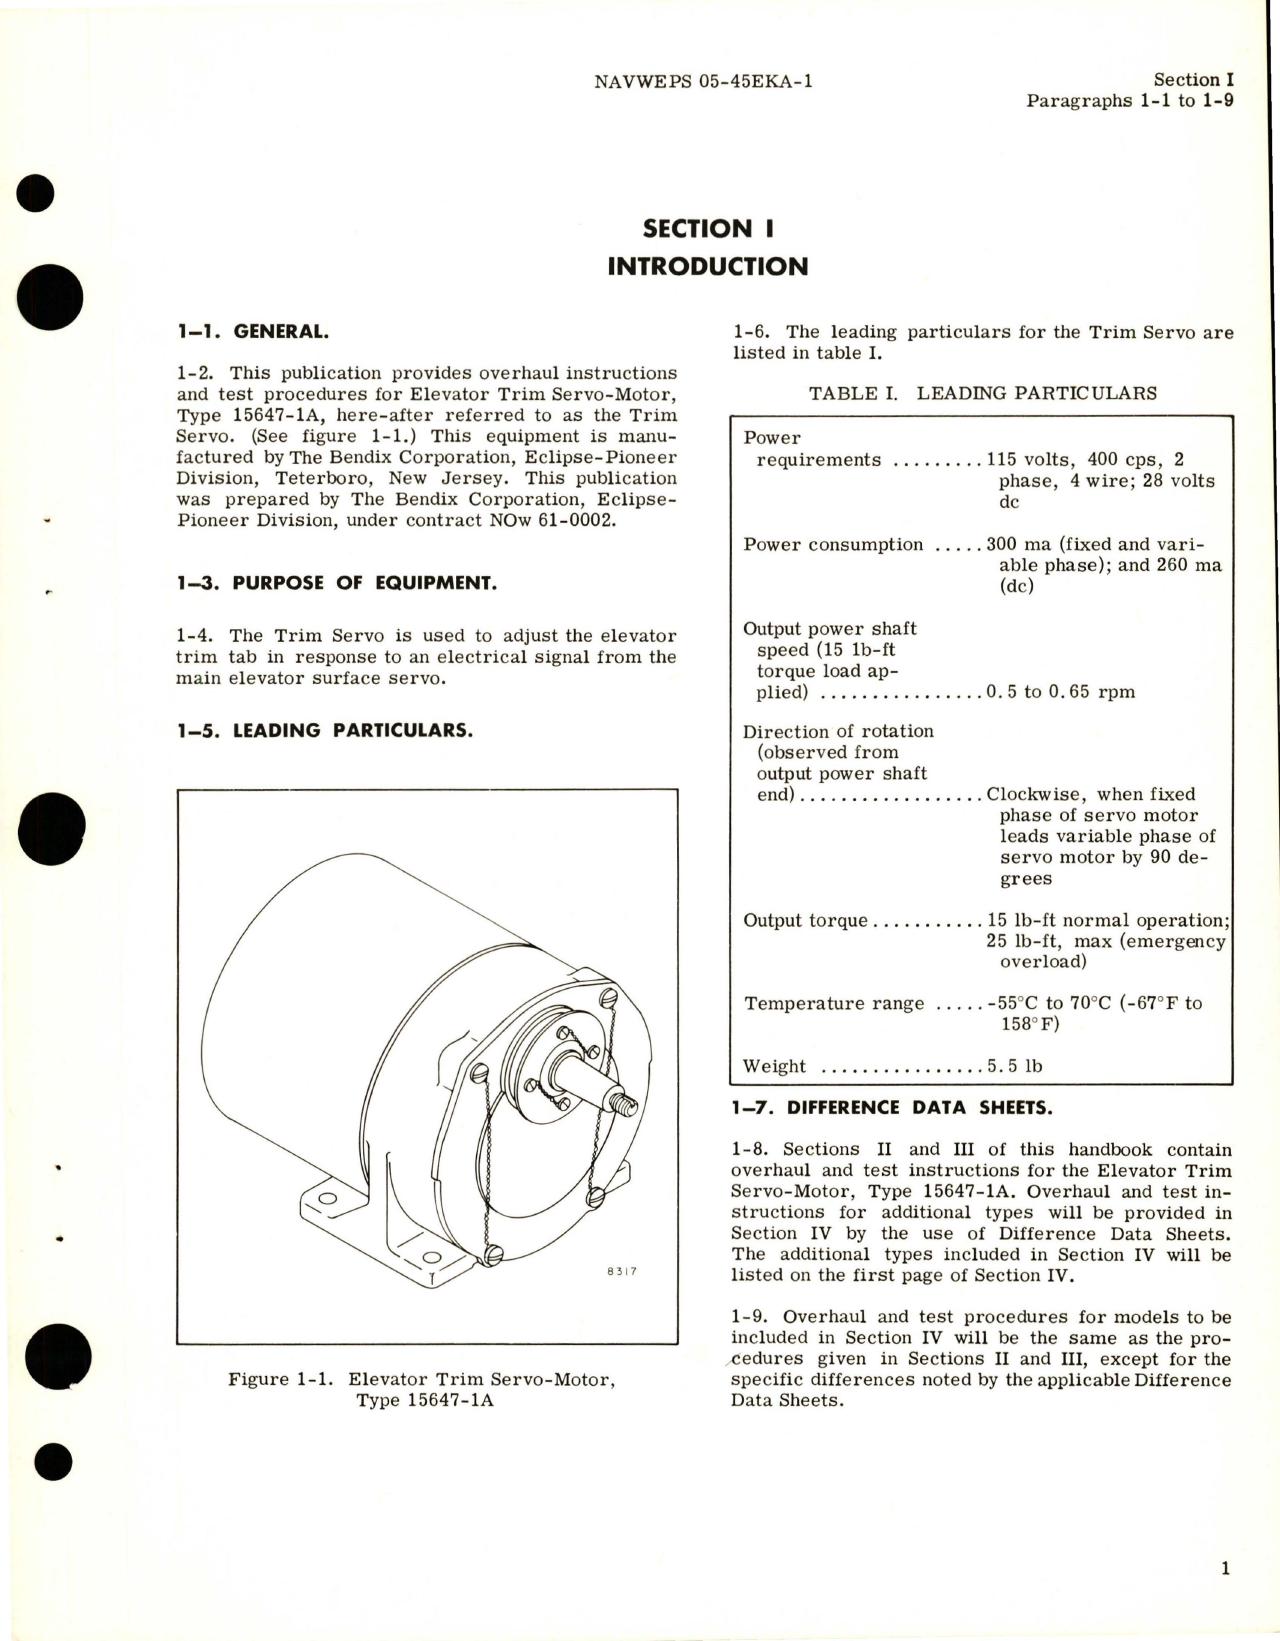 Sample page 5 from AirCorps Library document: Overhaul Instructions for Elevator Trim Servo-Motor - Type 15647-1A